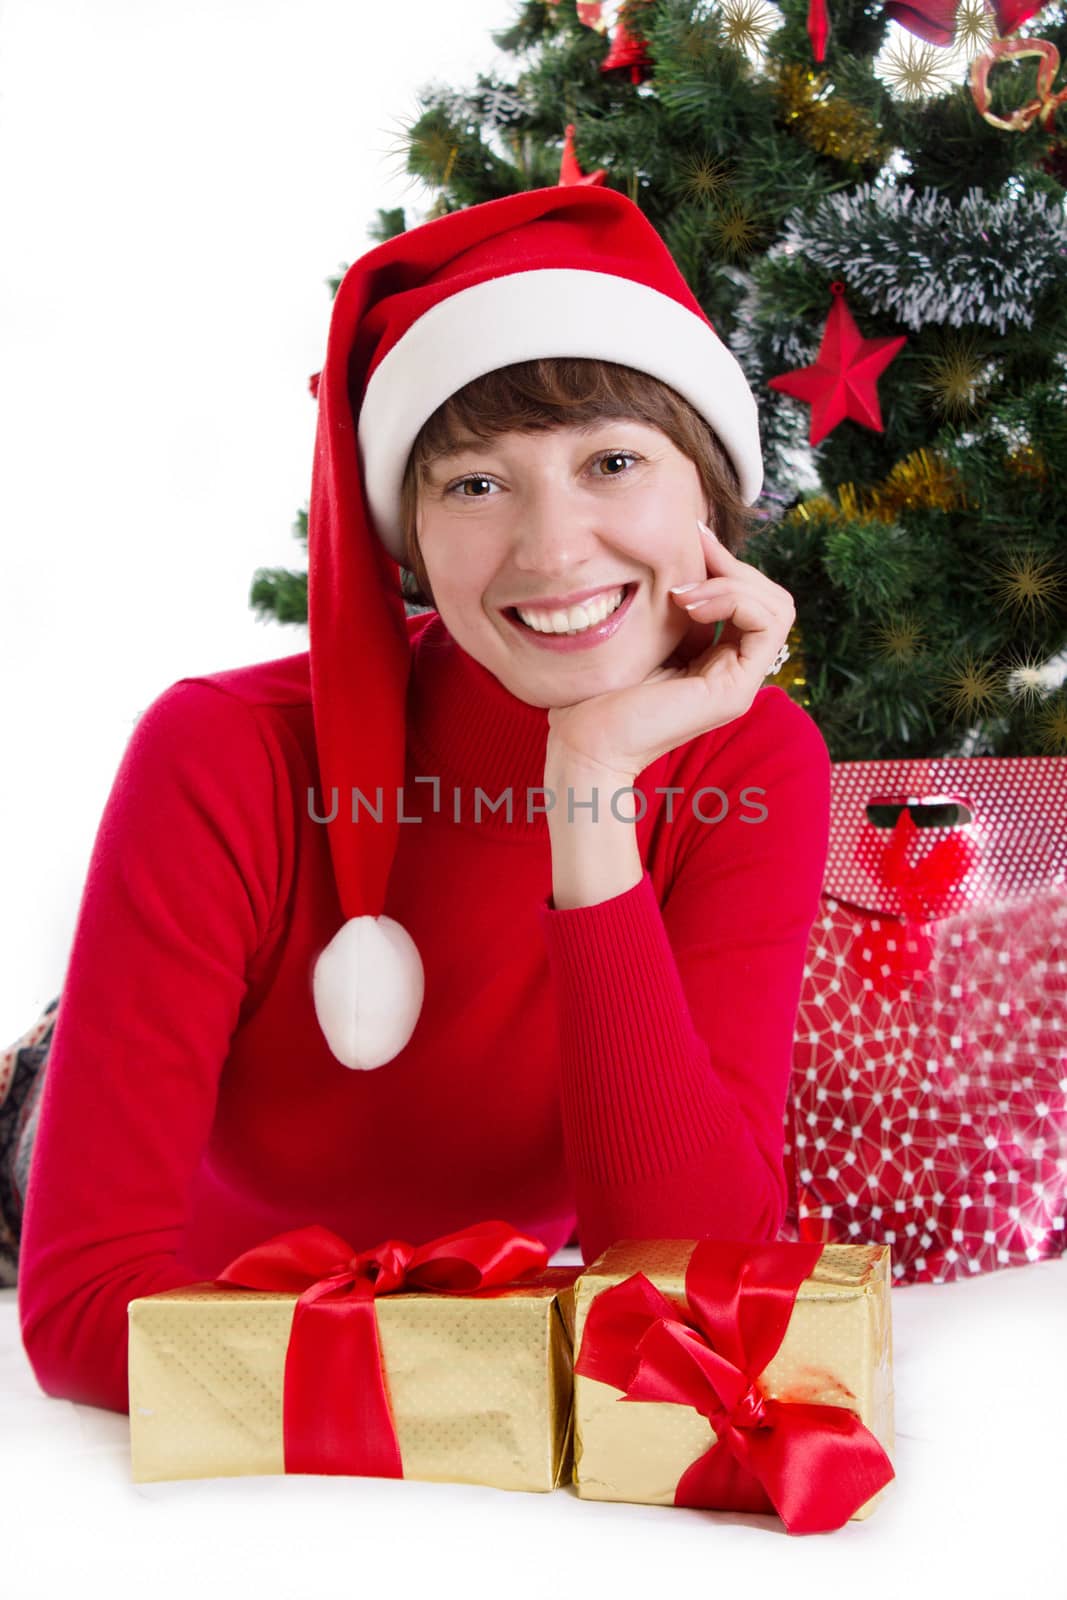 Woman in red Santa hat lying under Christmas tree with gifts by Angel_a